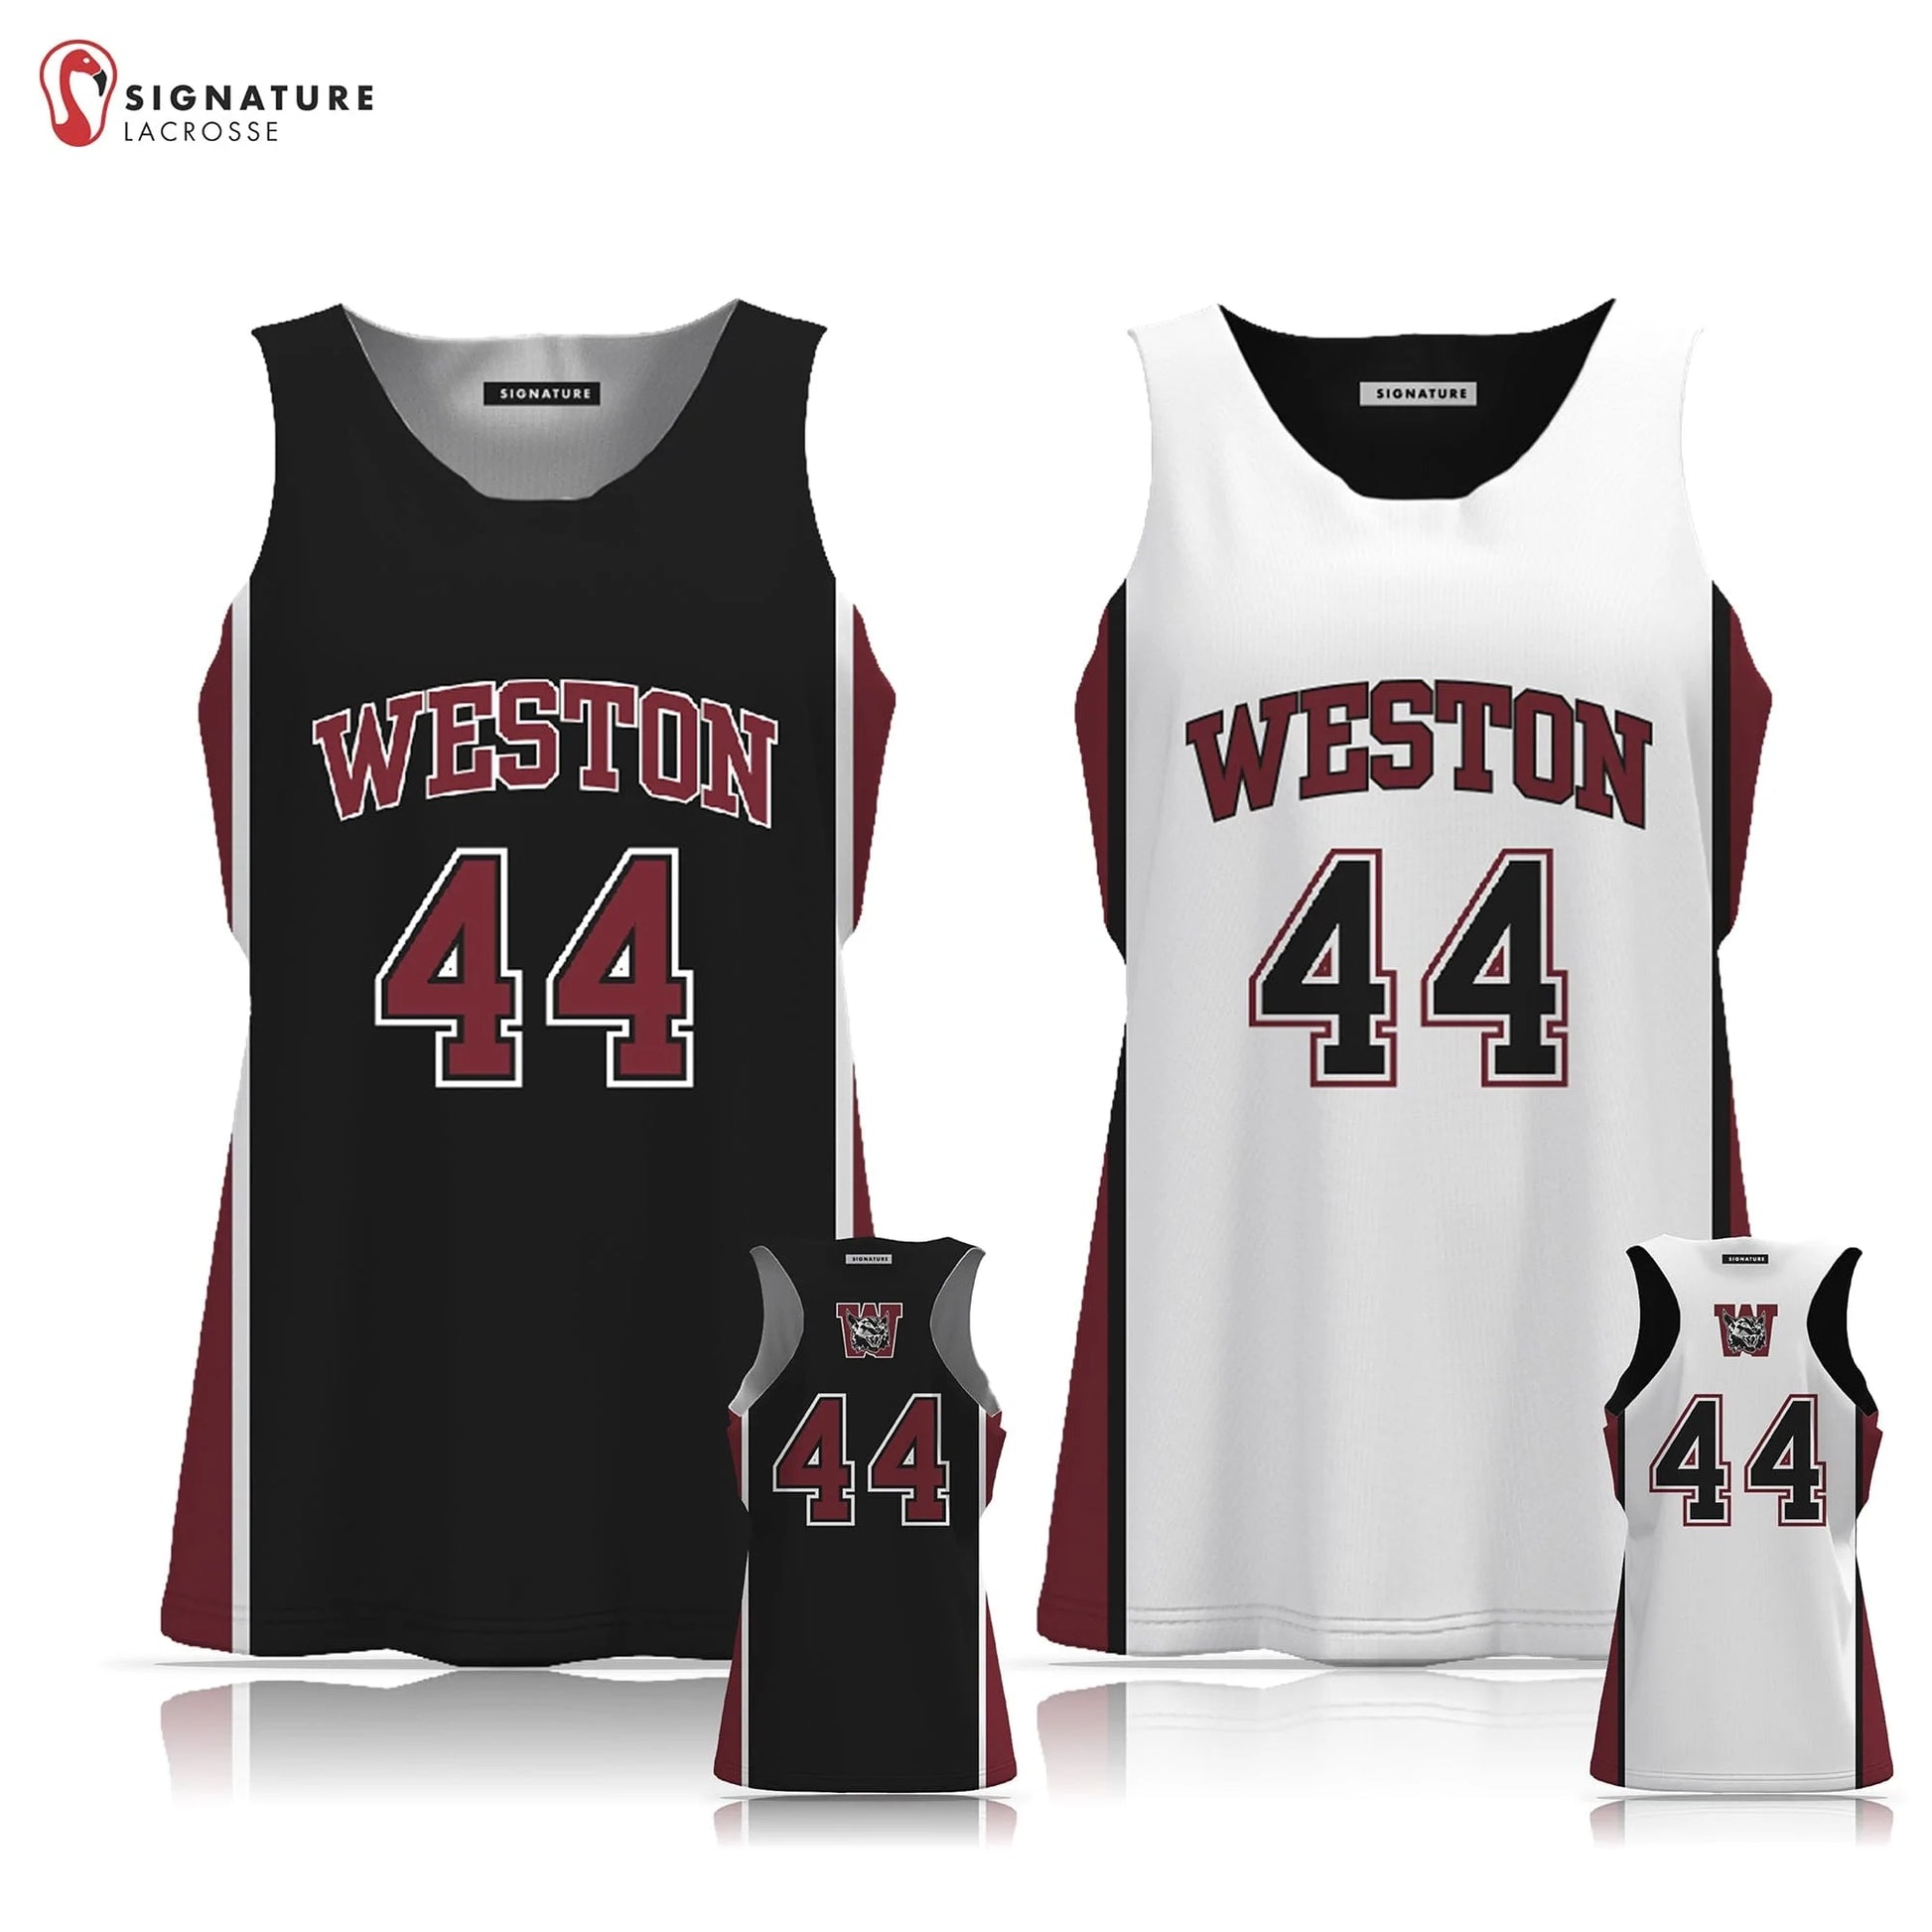 Weston Youth Lacrosse Women's 2 Piece Player Game Package Signature Lacrosse